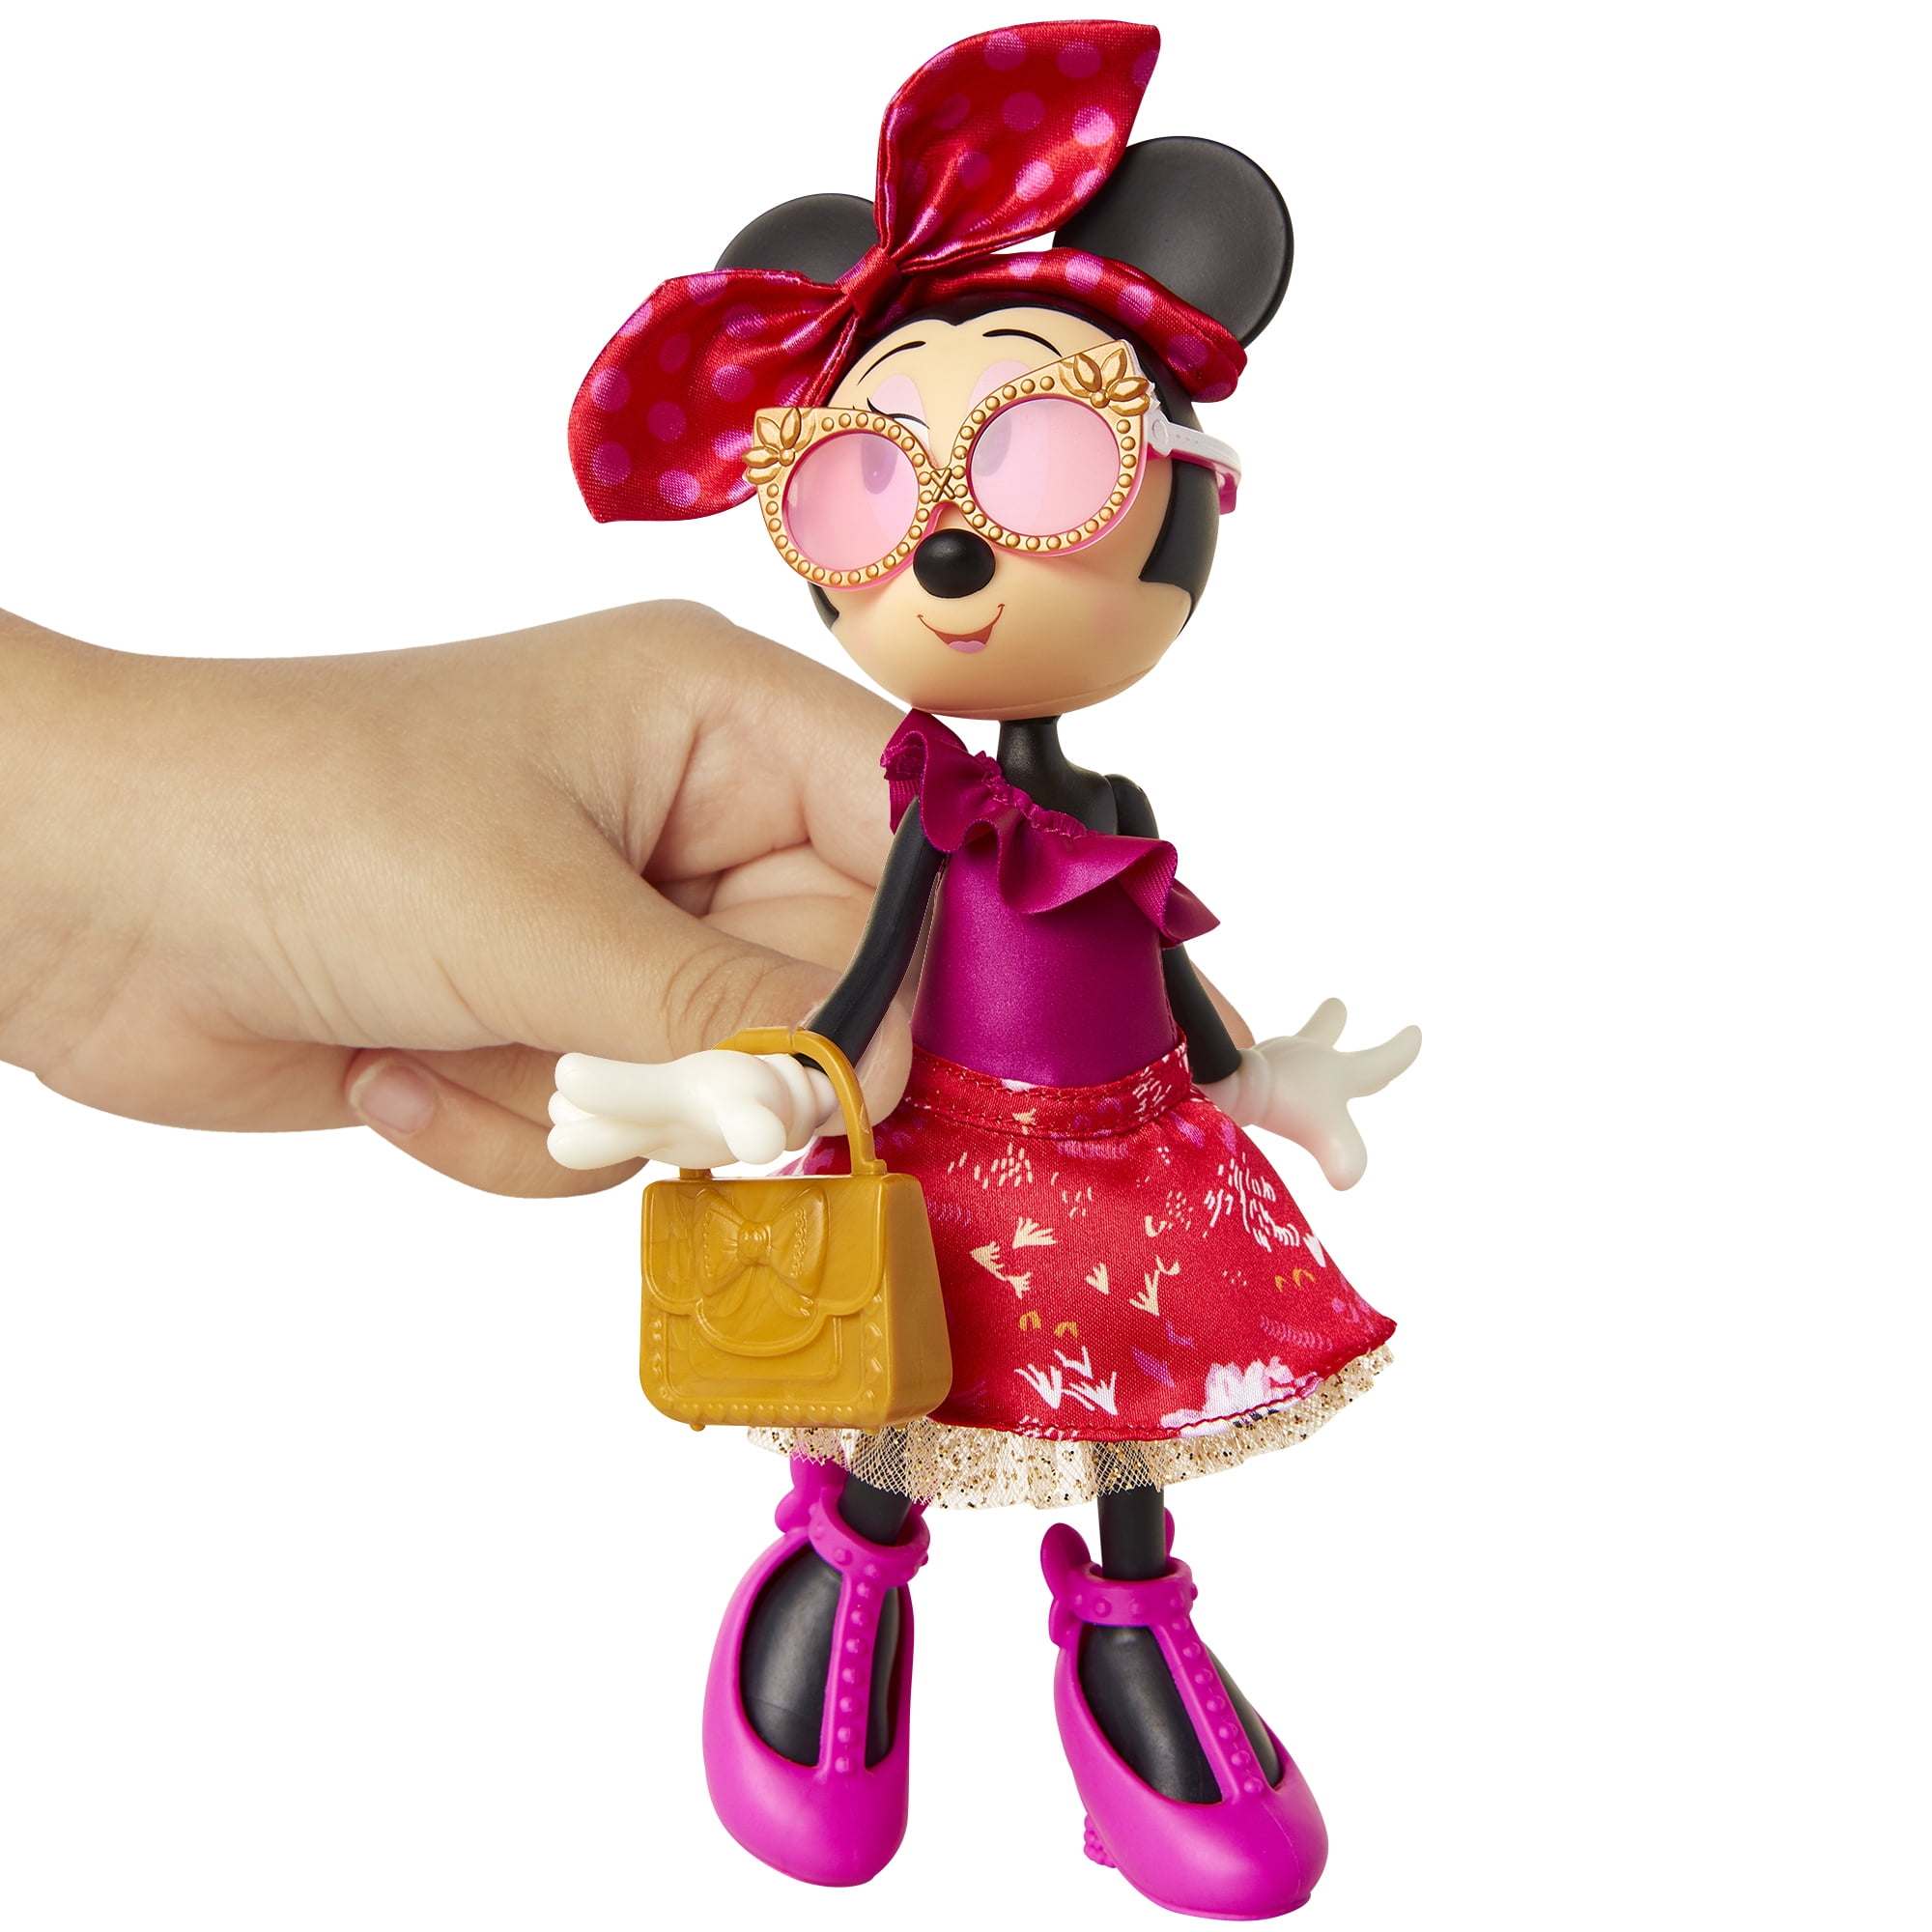 Disney Minnie Mouse Oh so Chic Fashion Doll 9 Inch Tall Poseable 2019 Jakks for sale online 